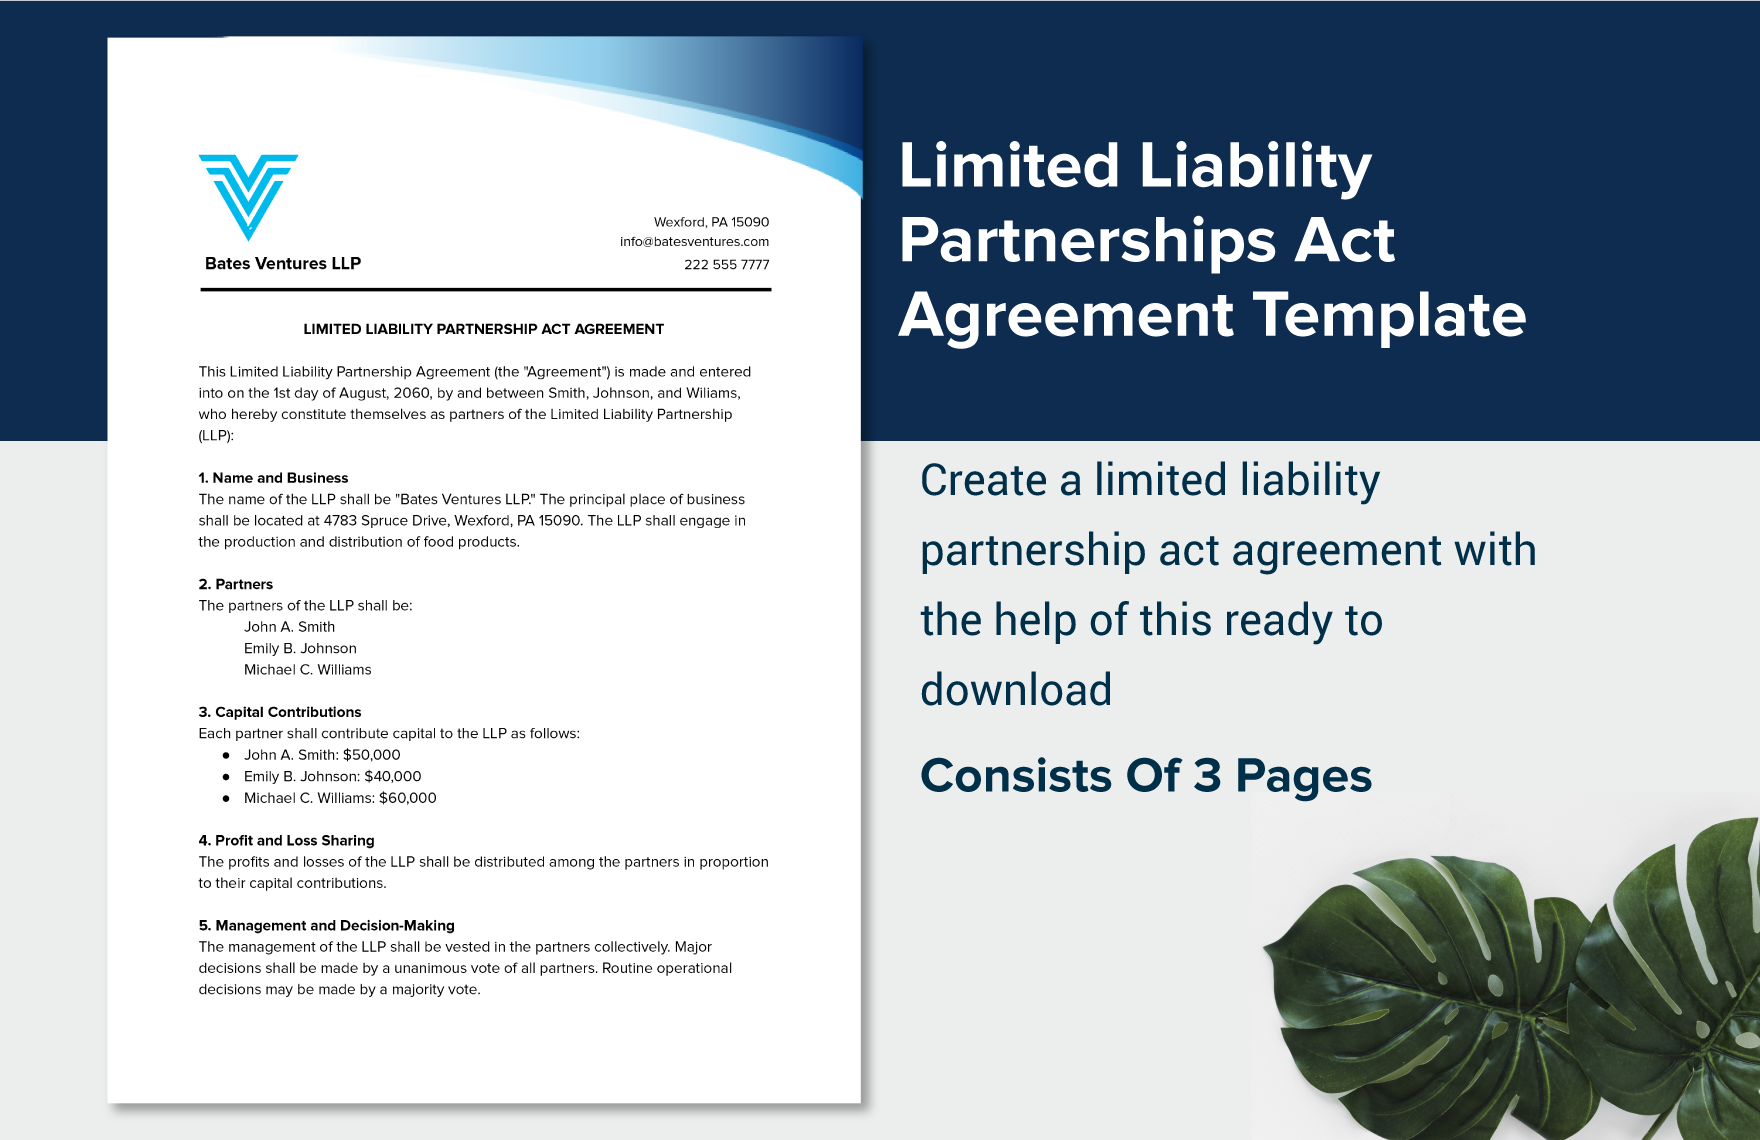 Limited Liability Partnerships Act Agreement Template